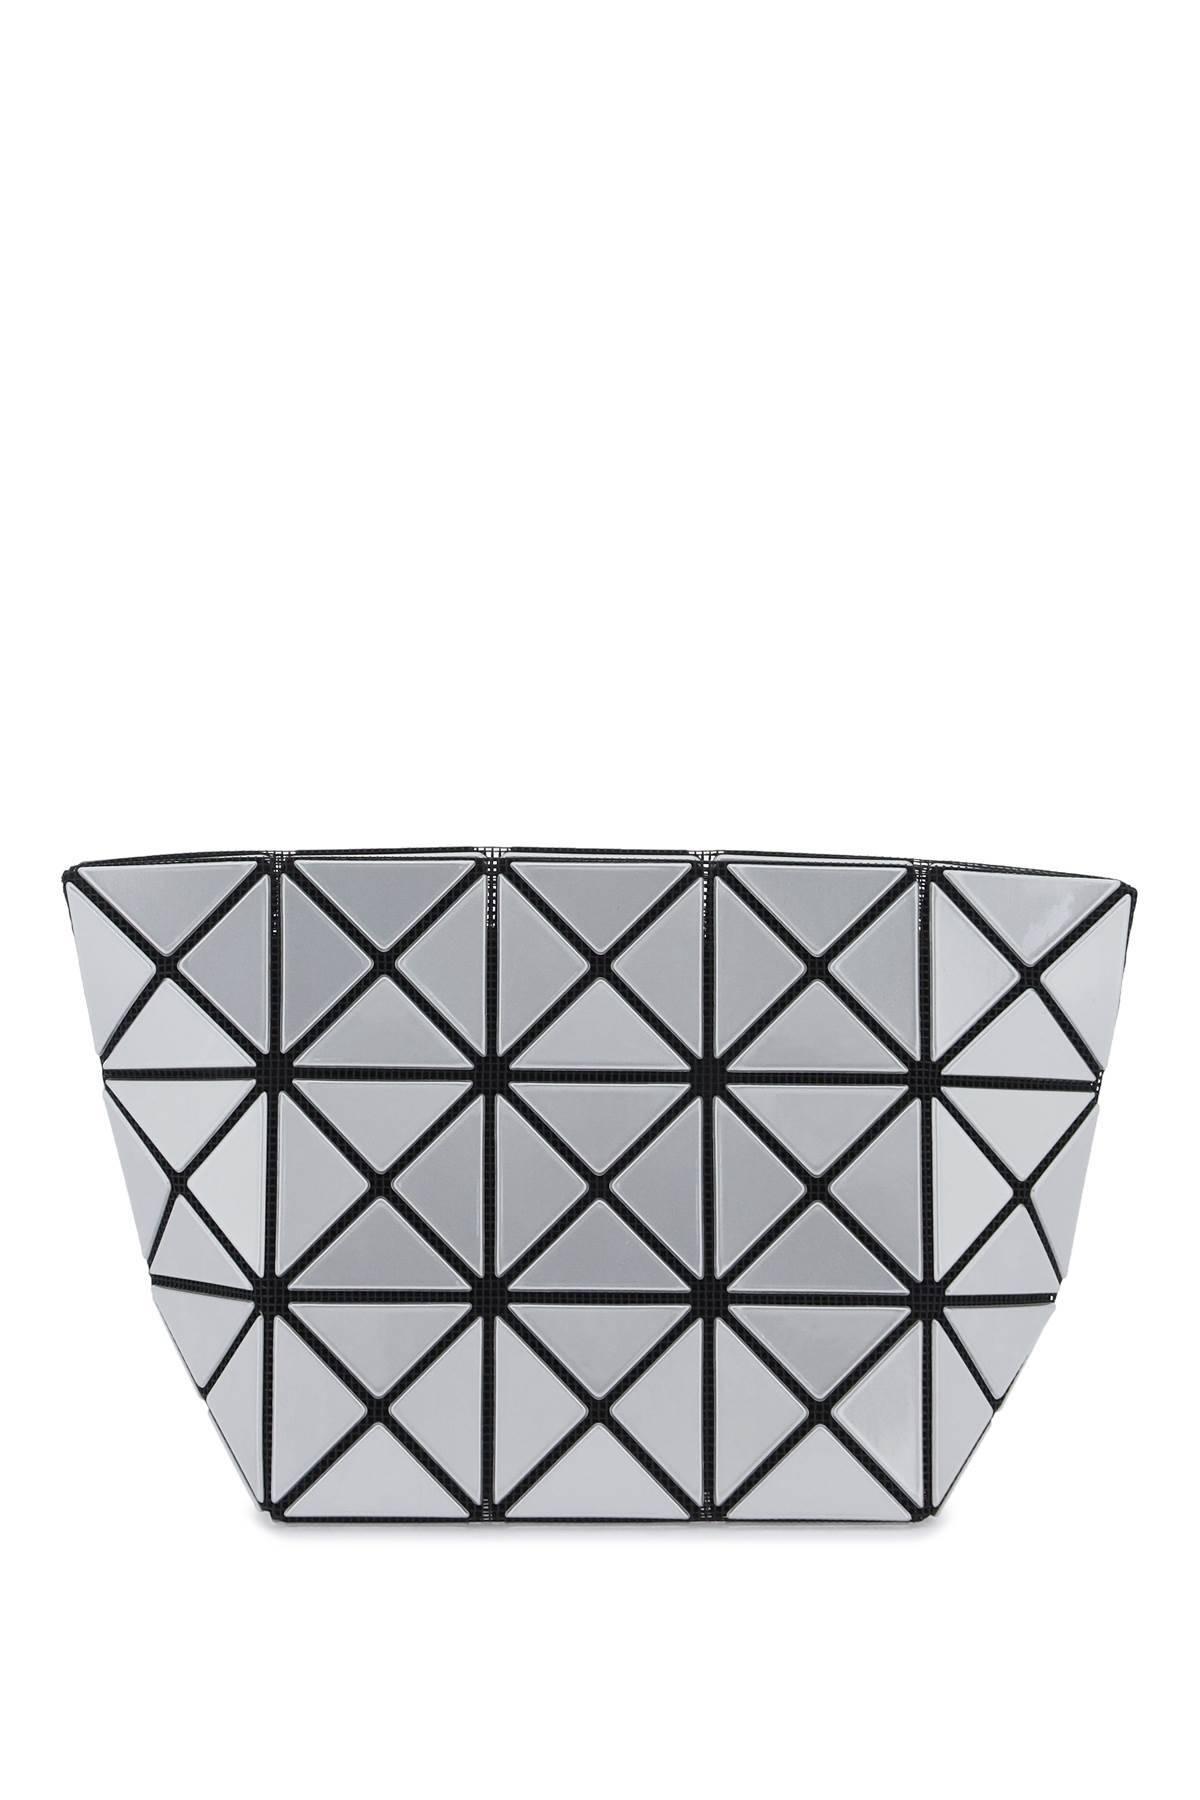 BAO BAO ISSEY MIYAKE BAO BAO ISSEY MIYAKE prism pouch